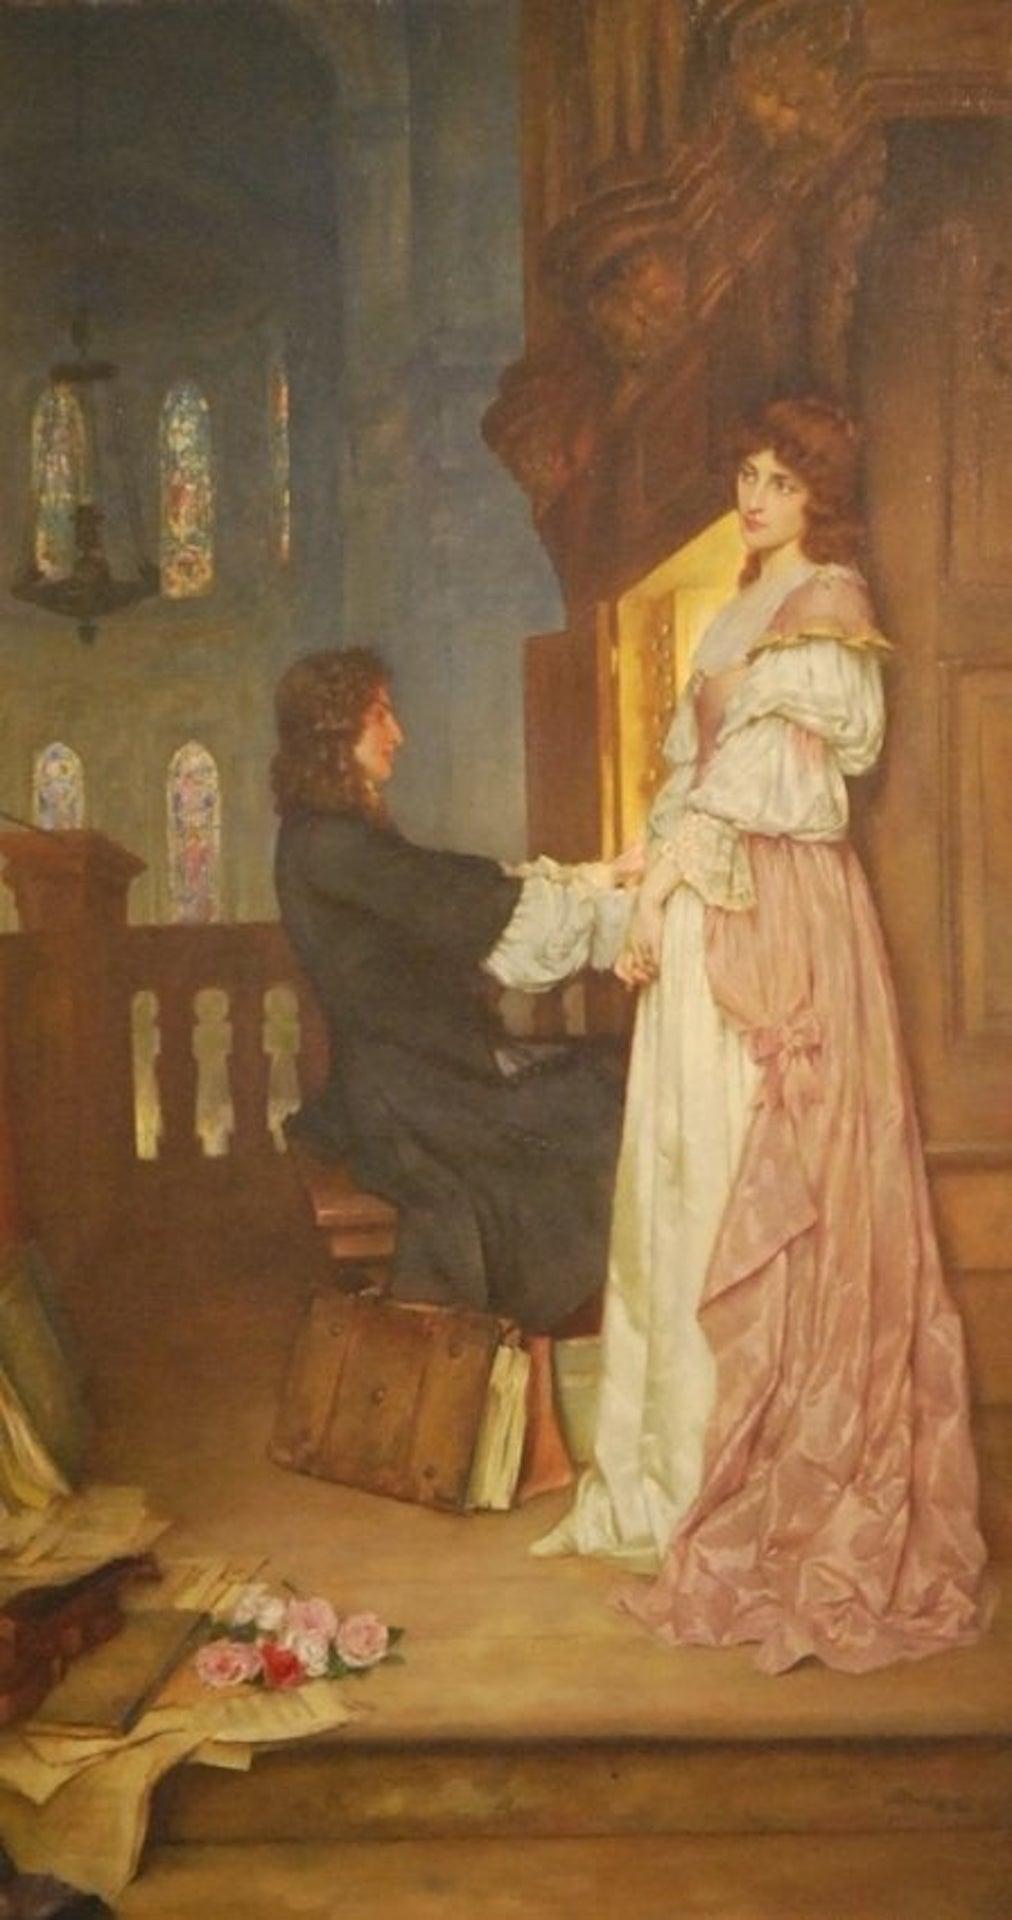 William A. Breakspeare (1855-1914)
If music be the food of love
Signed 'WA Breakspeare' (lower right)
Oil on canvas
Measures: 48 x 26 in. (121.9 x 66 cm).